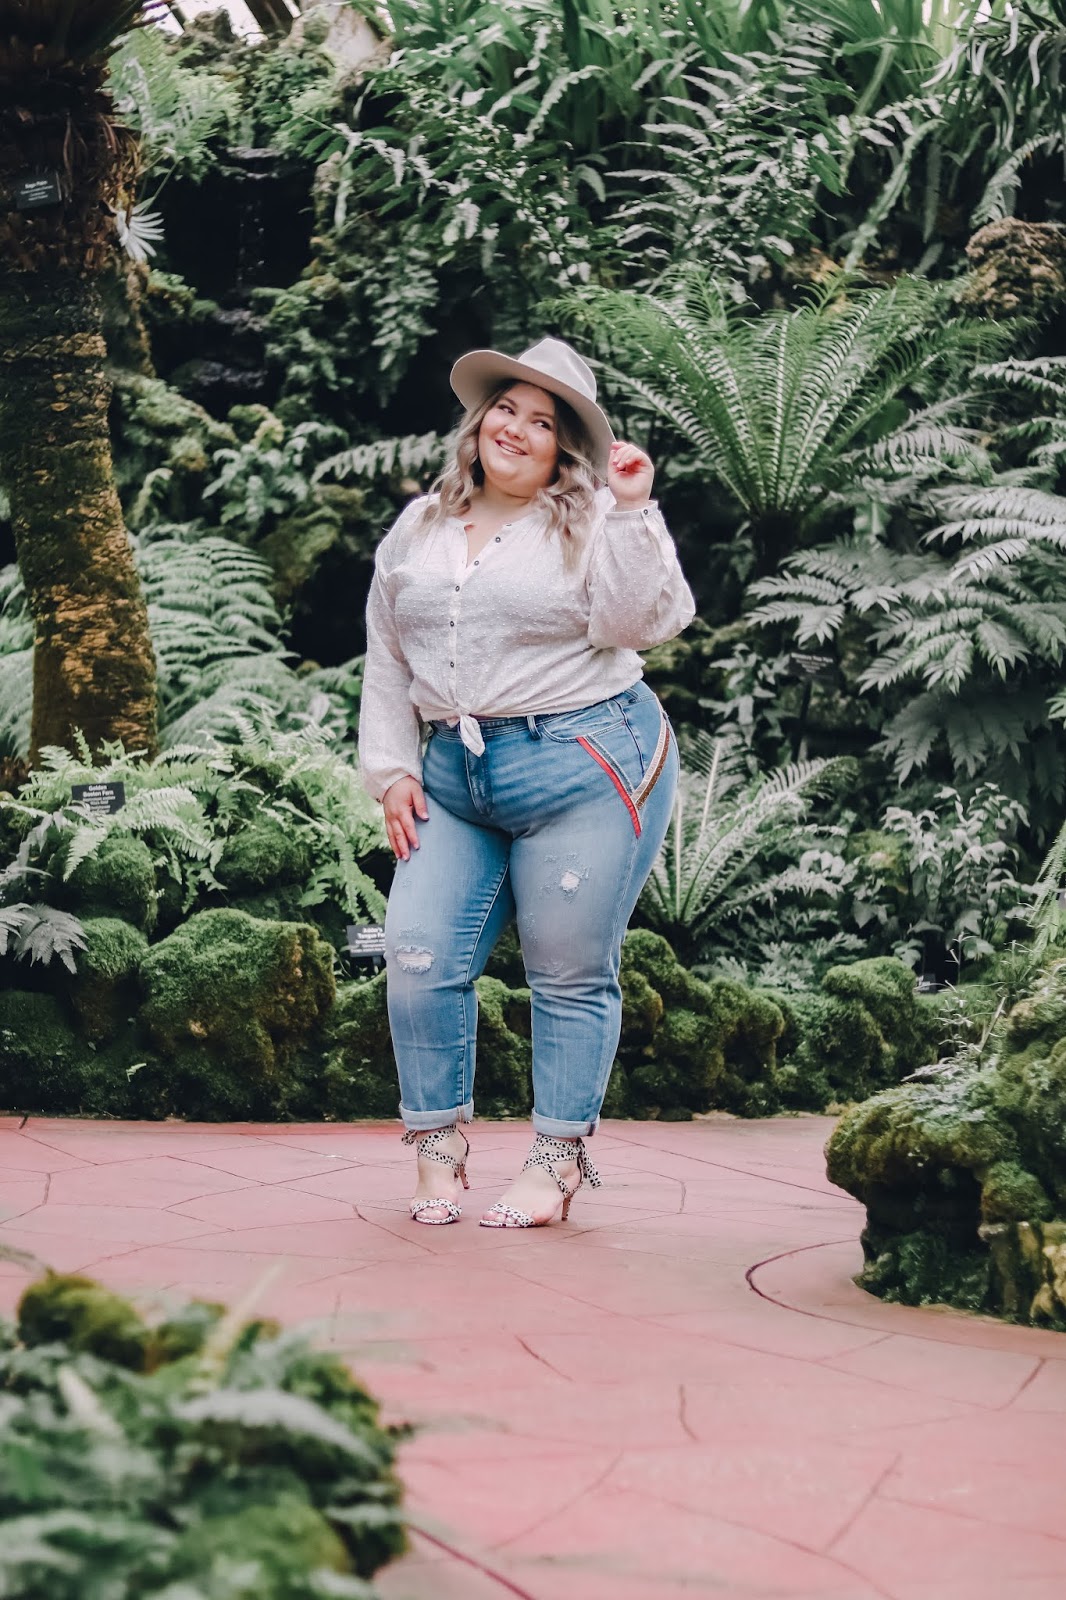 Chicago Plus Size Petite Fashion Blogger Natalie in the City reviews Anthropologie's jeans and denim.